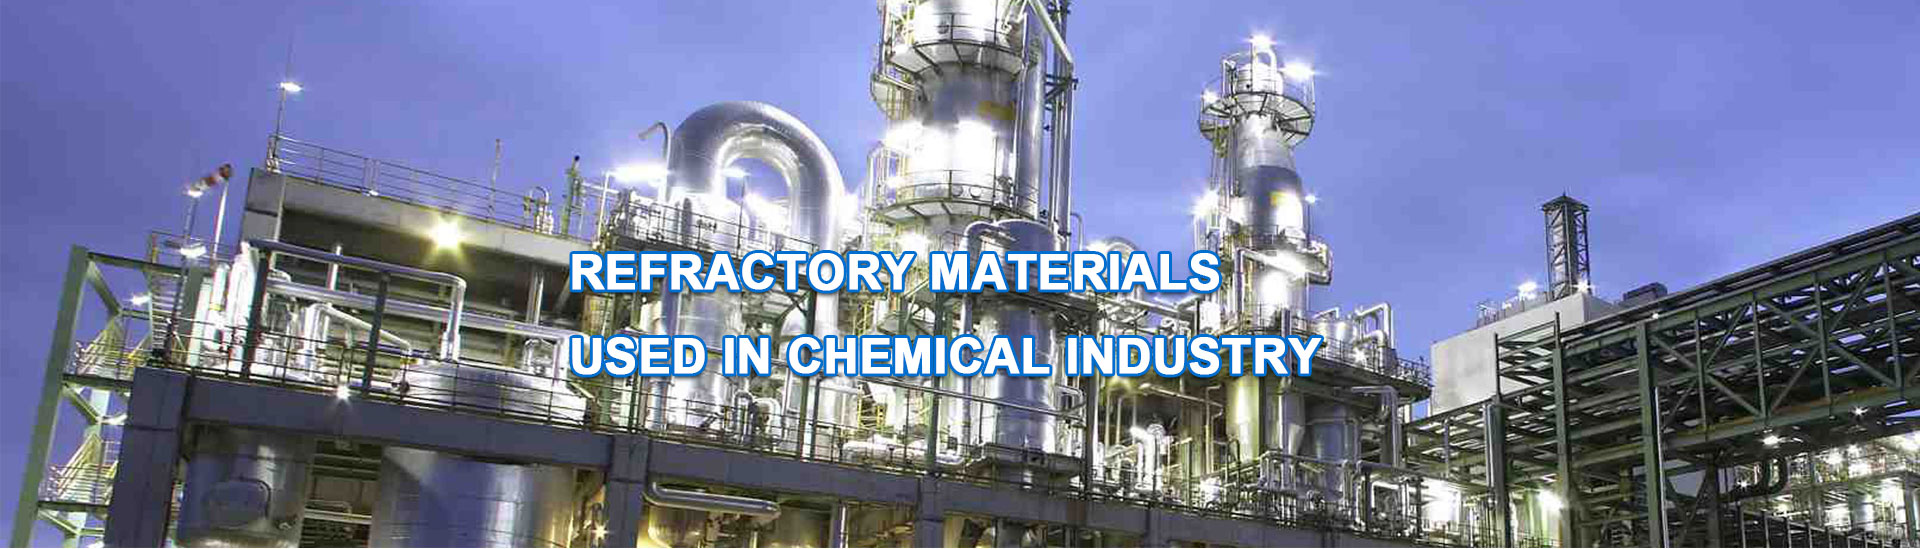 Refractory materials used in chemical industry.